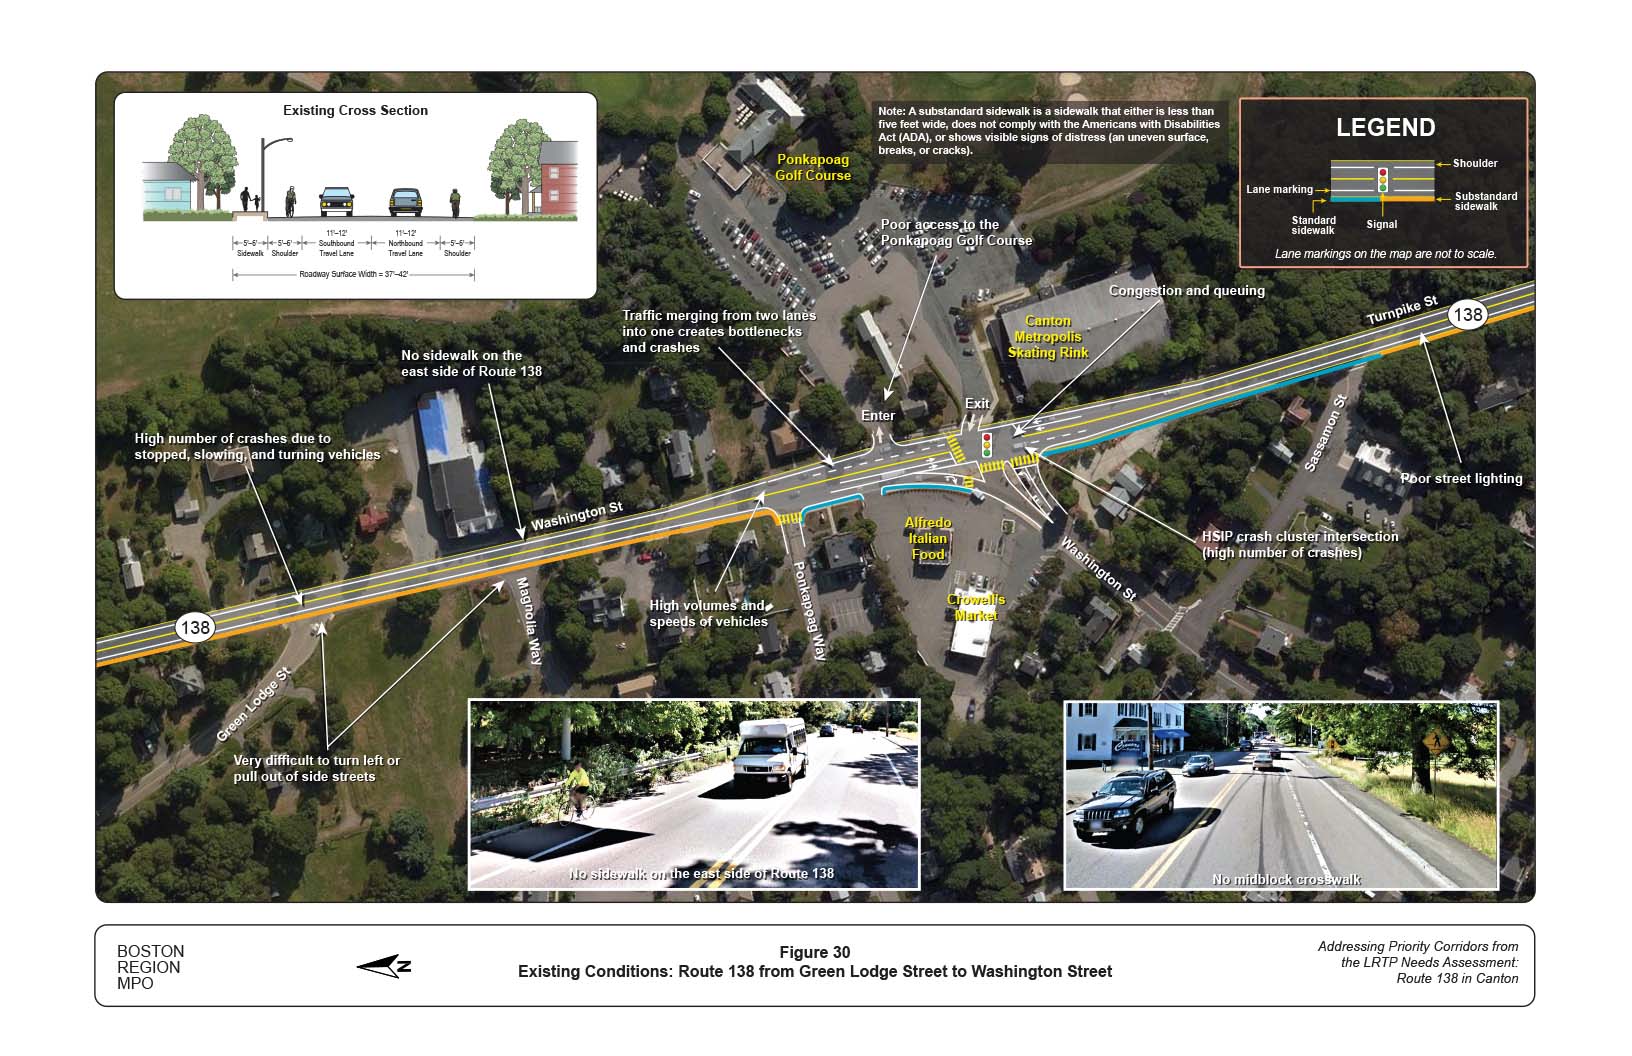 Figure 30 is map of Route 138 at Green Lodge and Washington Street with overlays showing the locations of existing problems on the roadway and a graphic of the current cross section of the roadway.